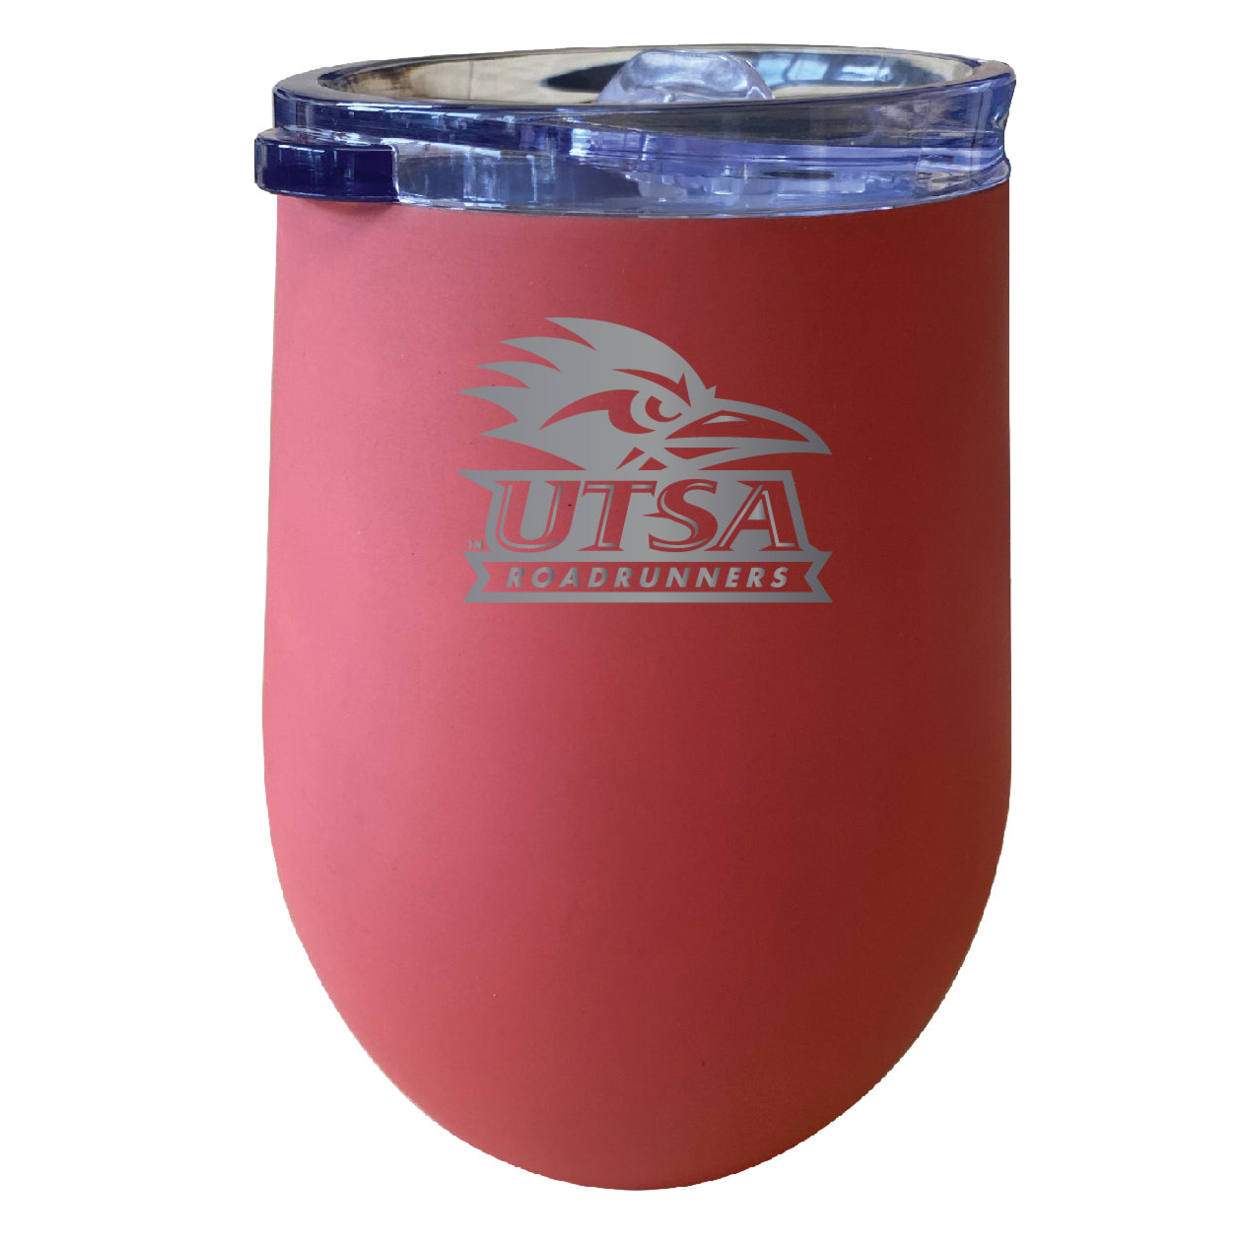 UTSA Road Runners 12 Oz Etched Insulated Wine Stainless Steel Tumbler - Choose Your Color - Coral